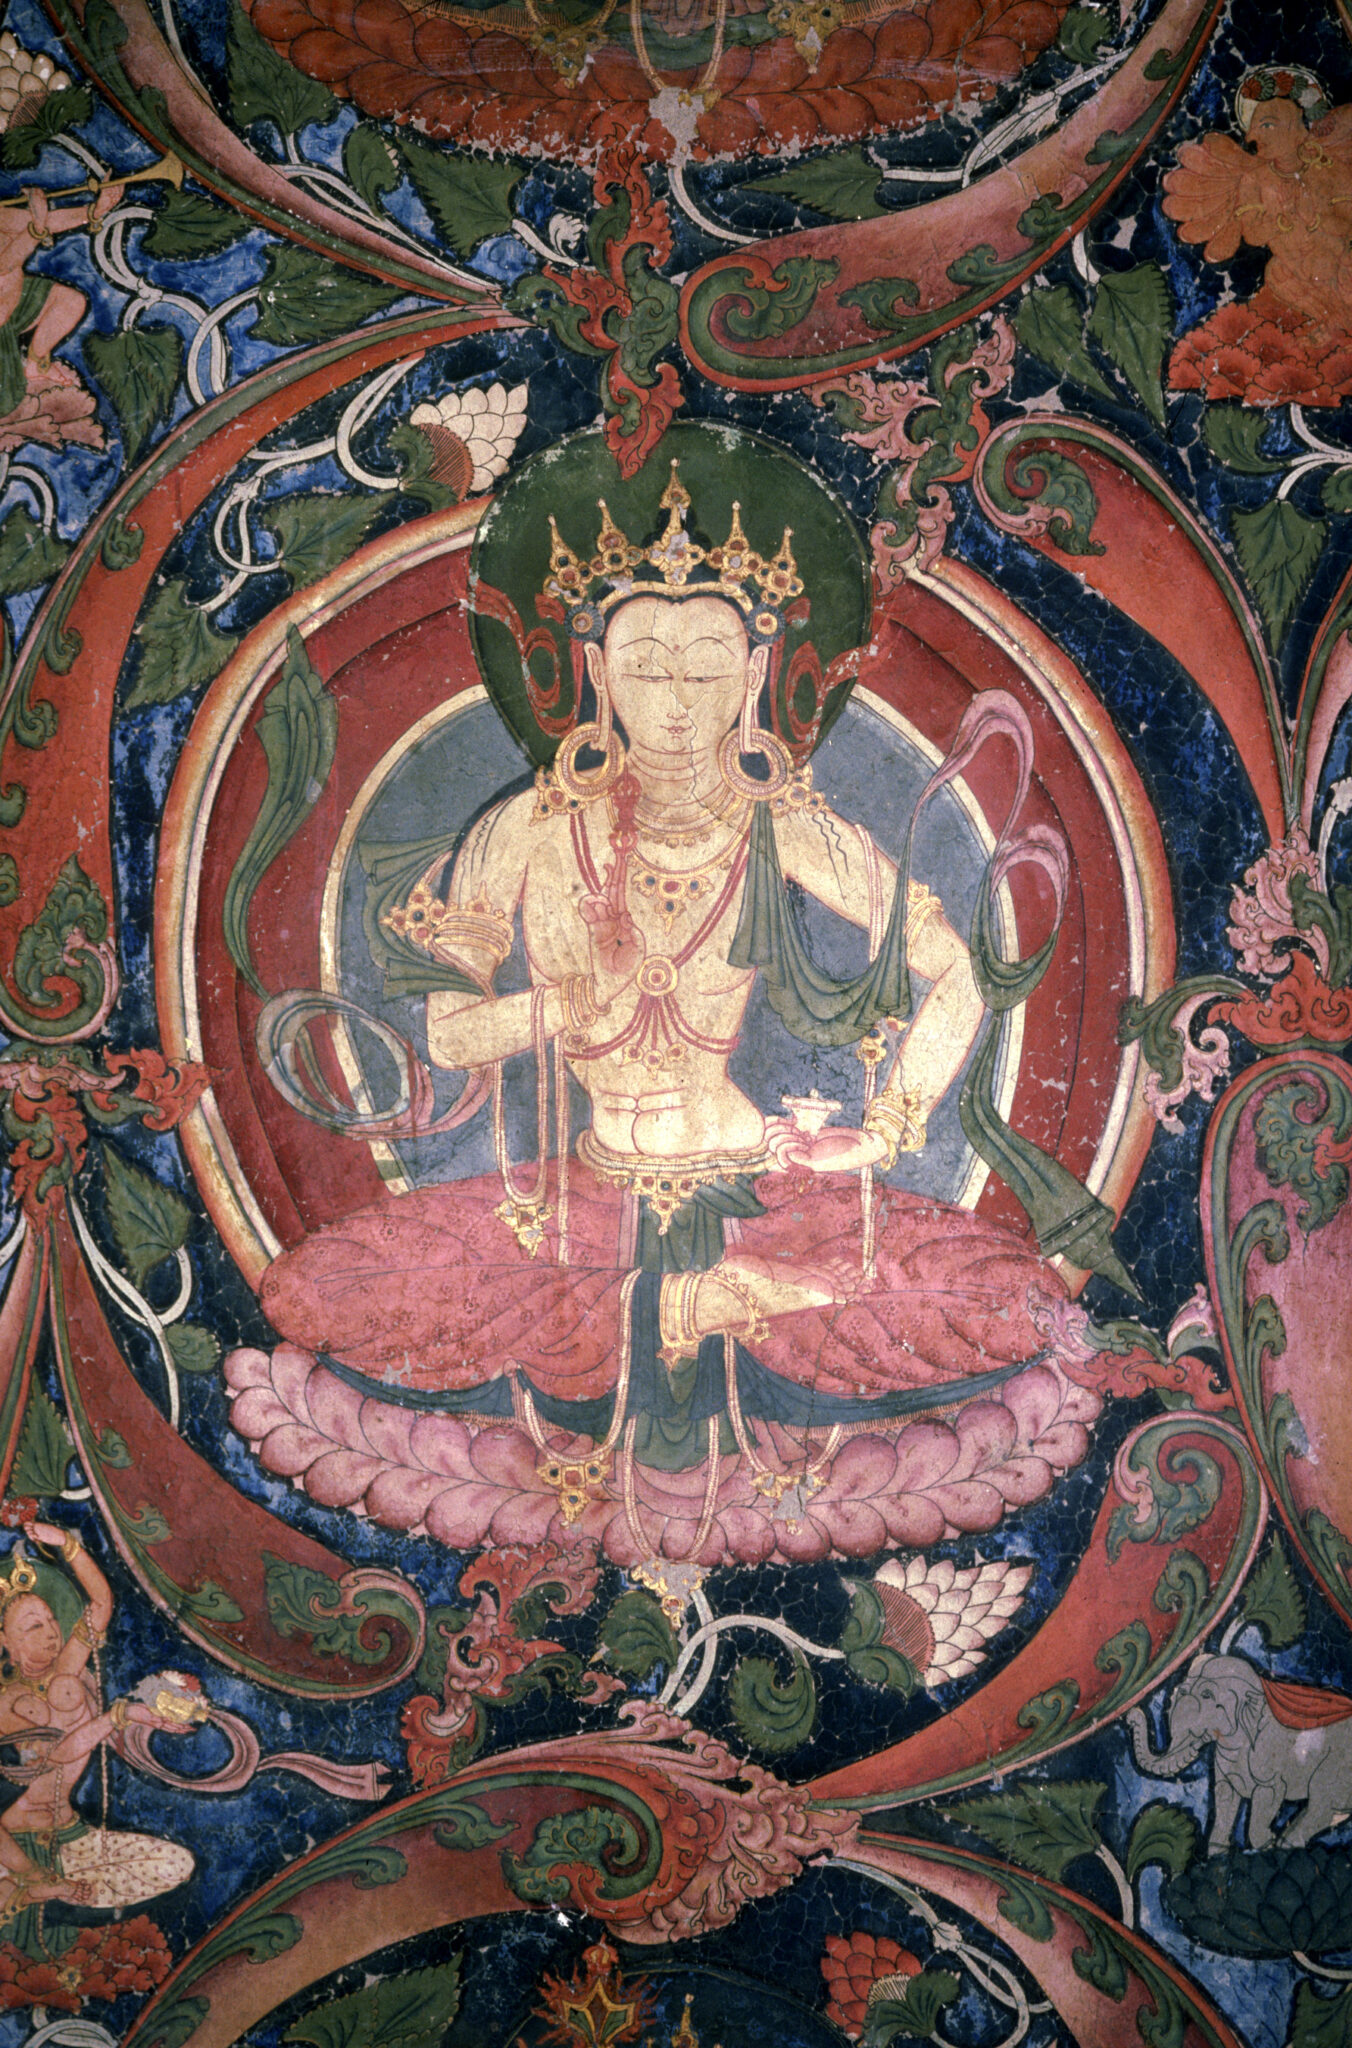 Crowned deity wearing pink dhoti seated on lotus, hands posed in mudras, within ovoid scrollwork border